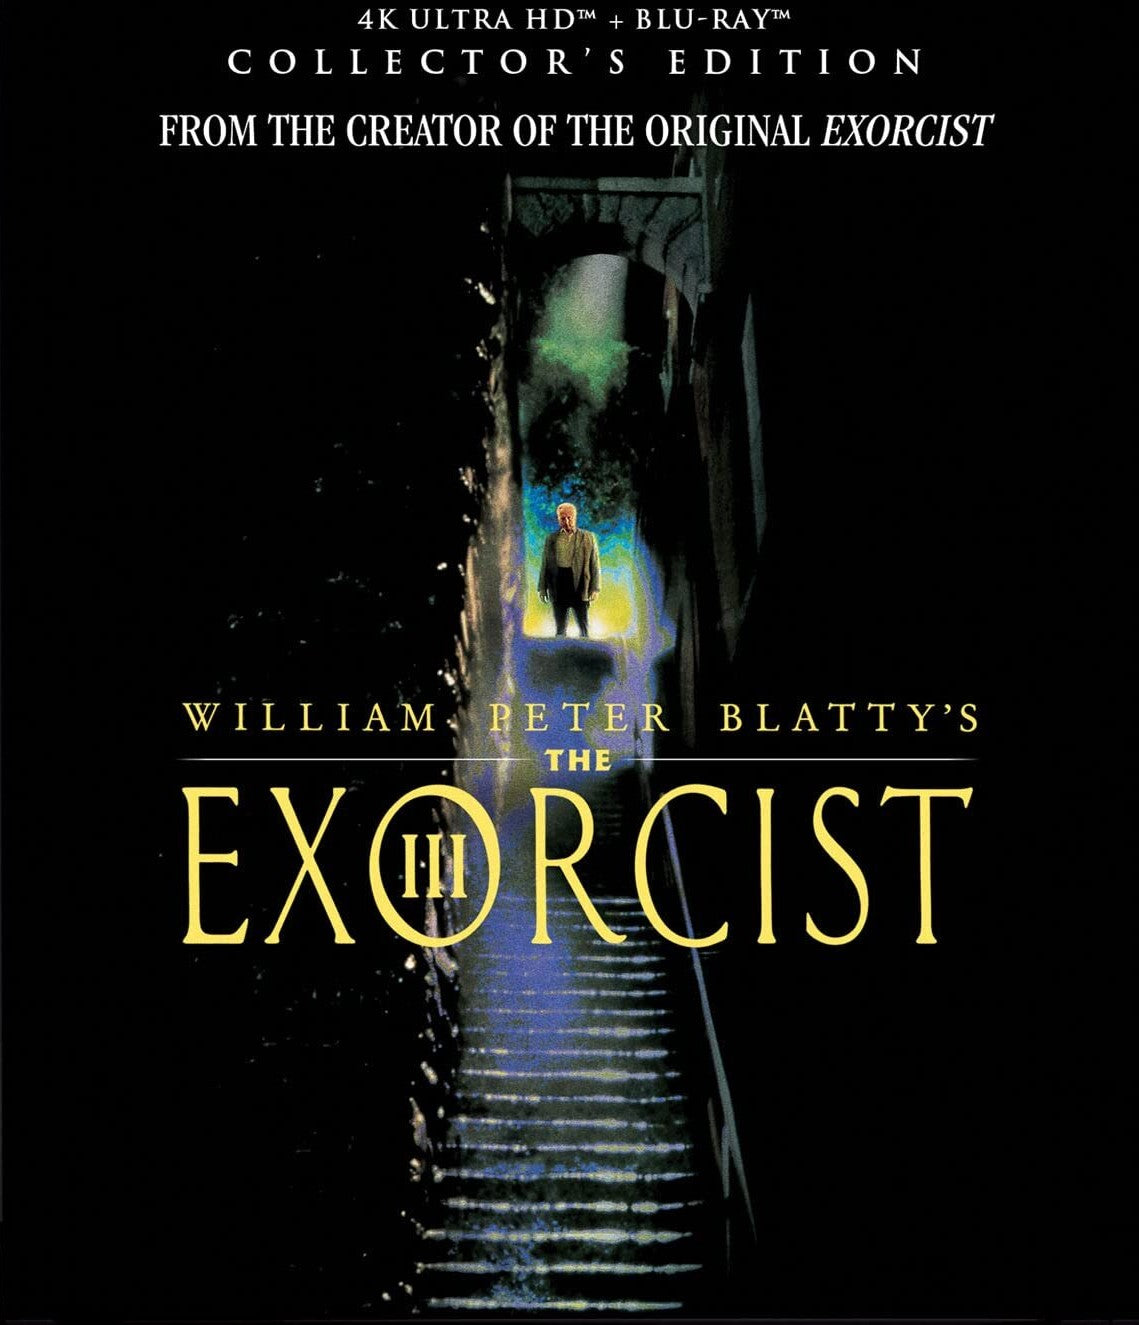 THE EXORCIST III (COLLECTOR'S EDITION) 4K UHD/BLU-RAY